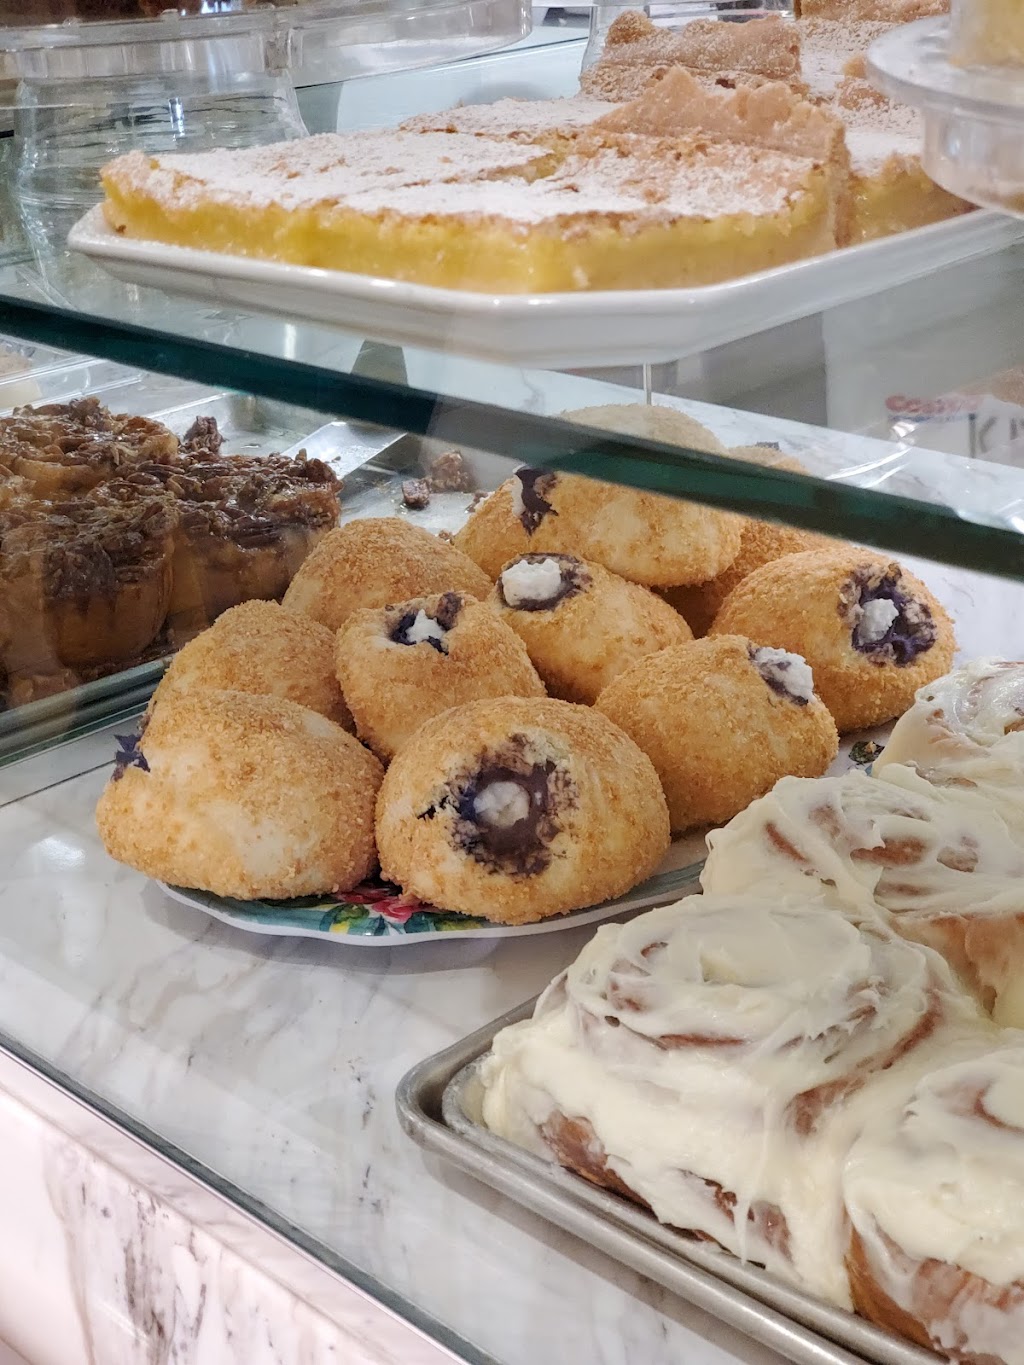 Humboldt Sweets Bakery | 670 S Green Valley Pkwy #110, Henderson, NV 89012, USA | Phone: (702) 434-0077